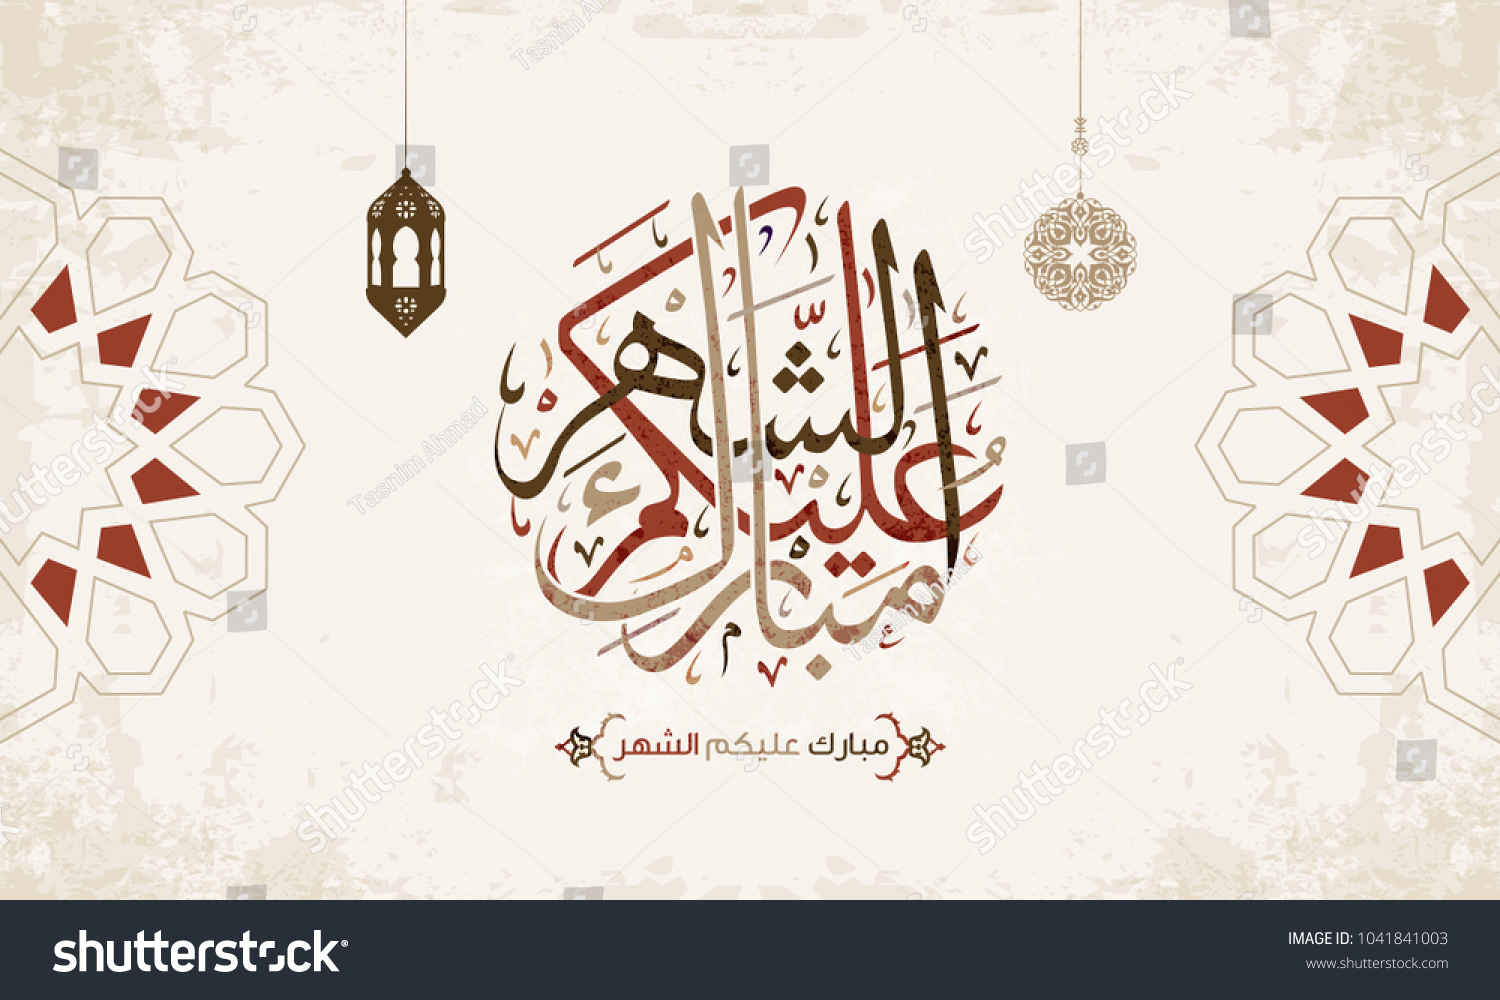 Vector of Arabic Greetings Word "May You Be Well Every Year" 2 #1041841003